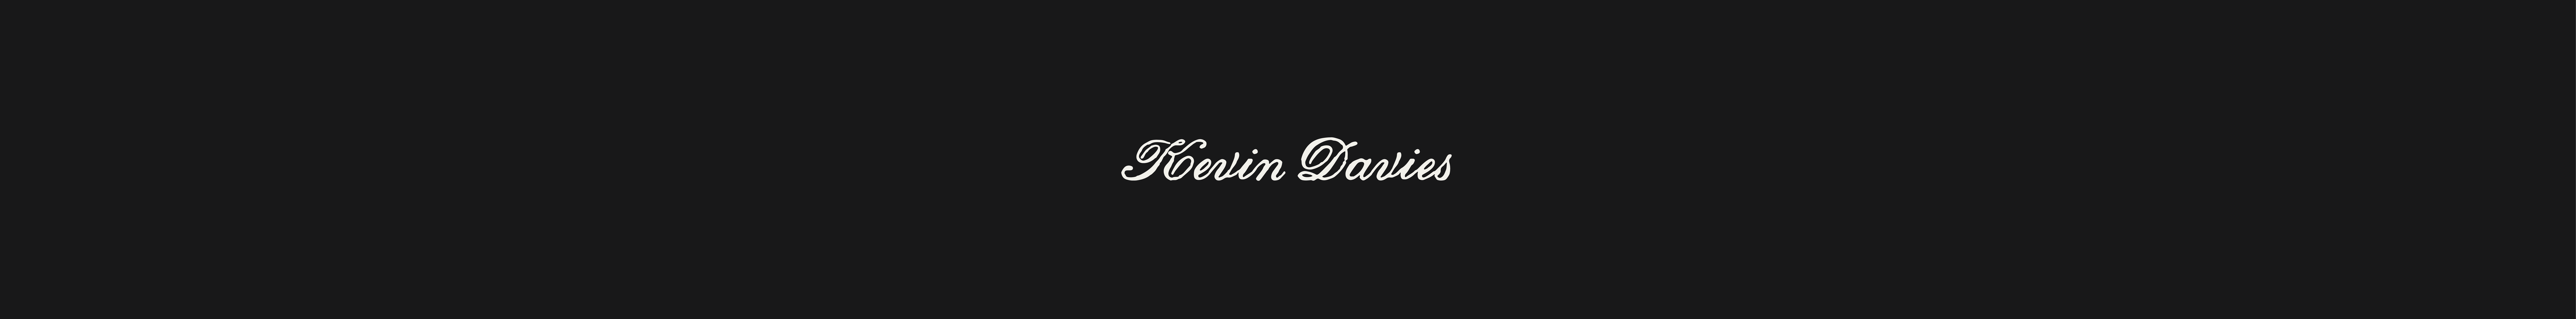 Kevin Davies's profile banner